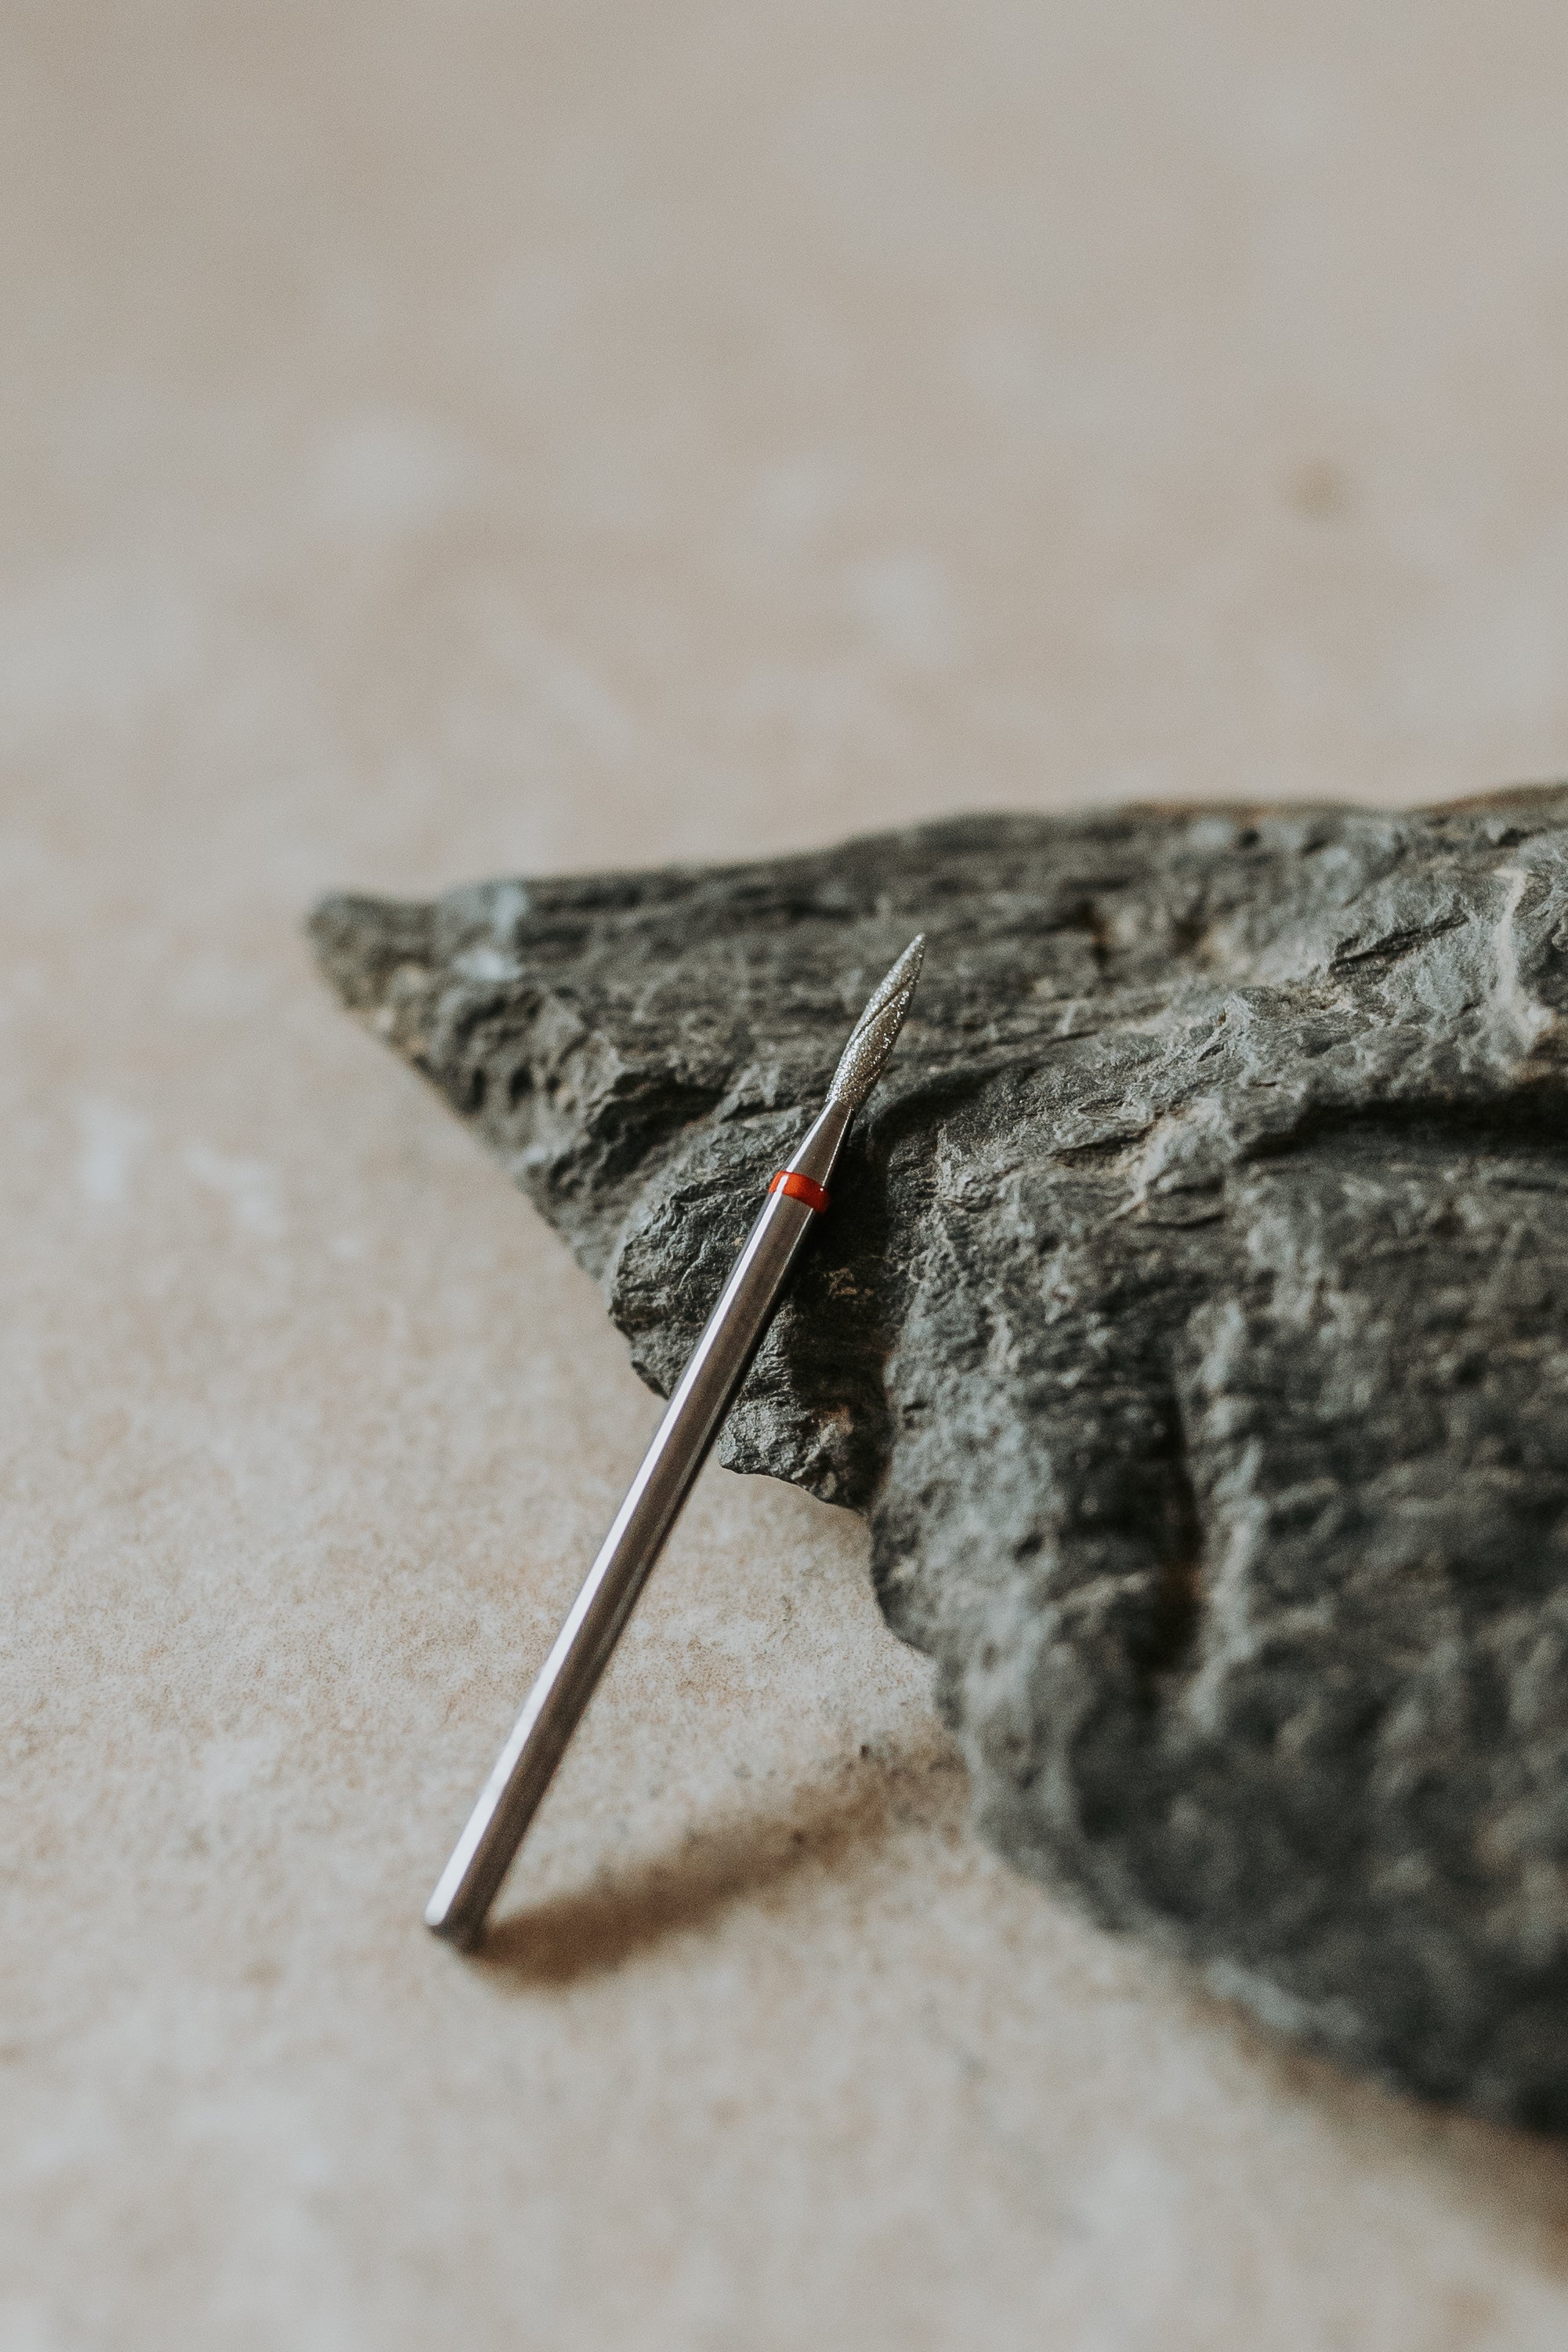 a small metal object on a rock